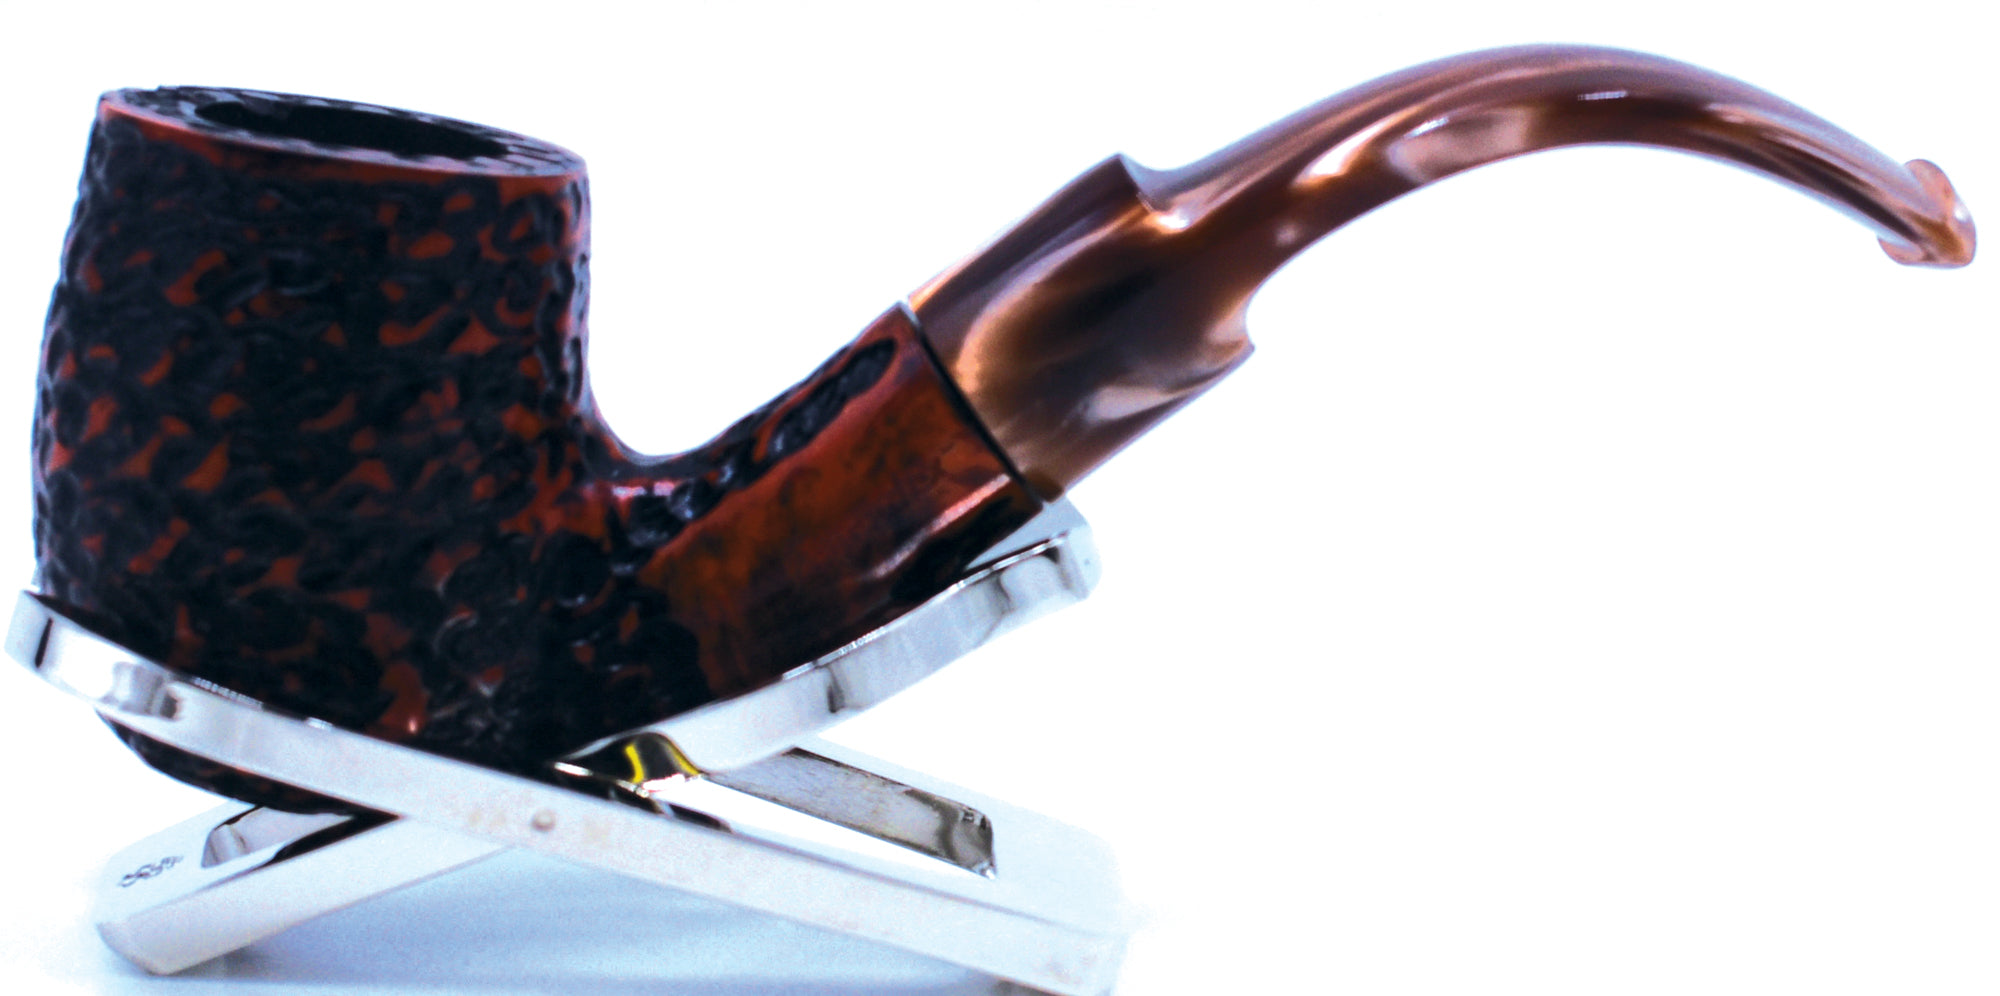 LEGENDEX® LASCALA* Plexiglass Mouthpiece 9 MM Filtered Briar Smoking Pipe Made In Italy 01-08-705